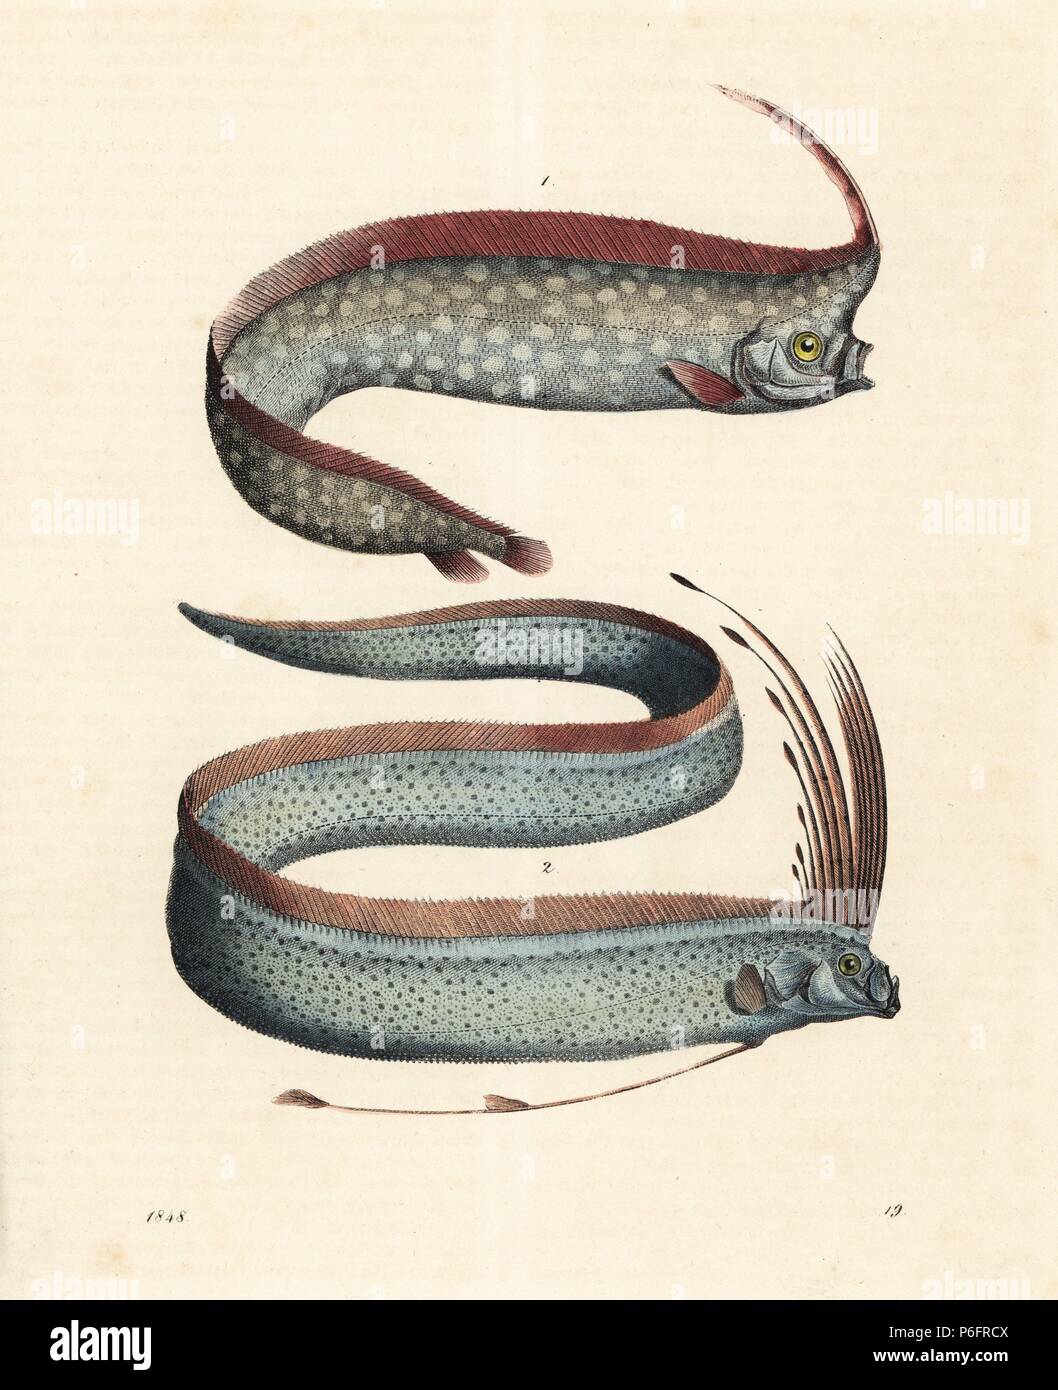 Crested oarfish, Lophotus lacepedei (Lophotes copedianus) and oarfish, Regalecus glesne (Gymnetrus gladius). Handcoloured lithograph from Carl Hoffmann's Book of the World, Stuttgart, 1848. Stock Photo